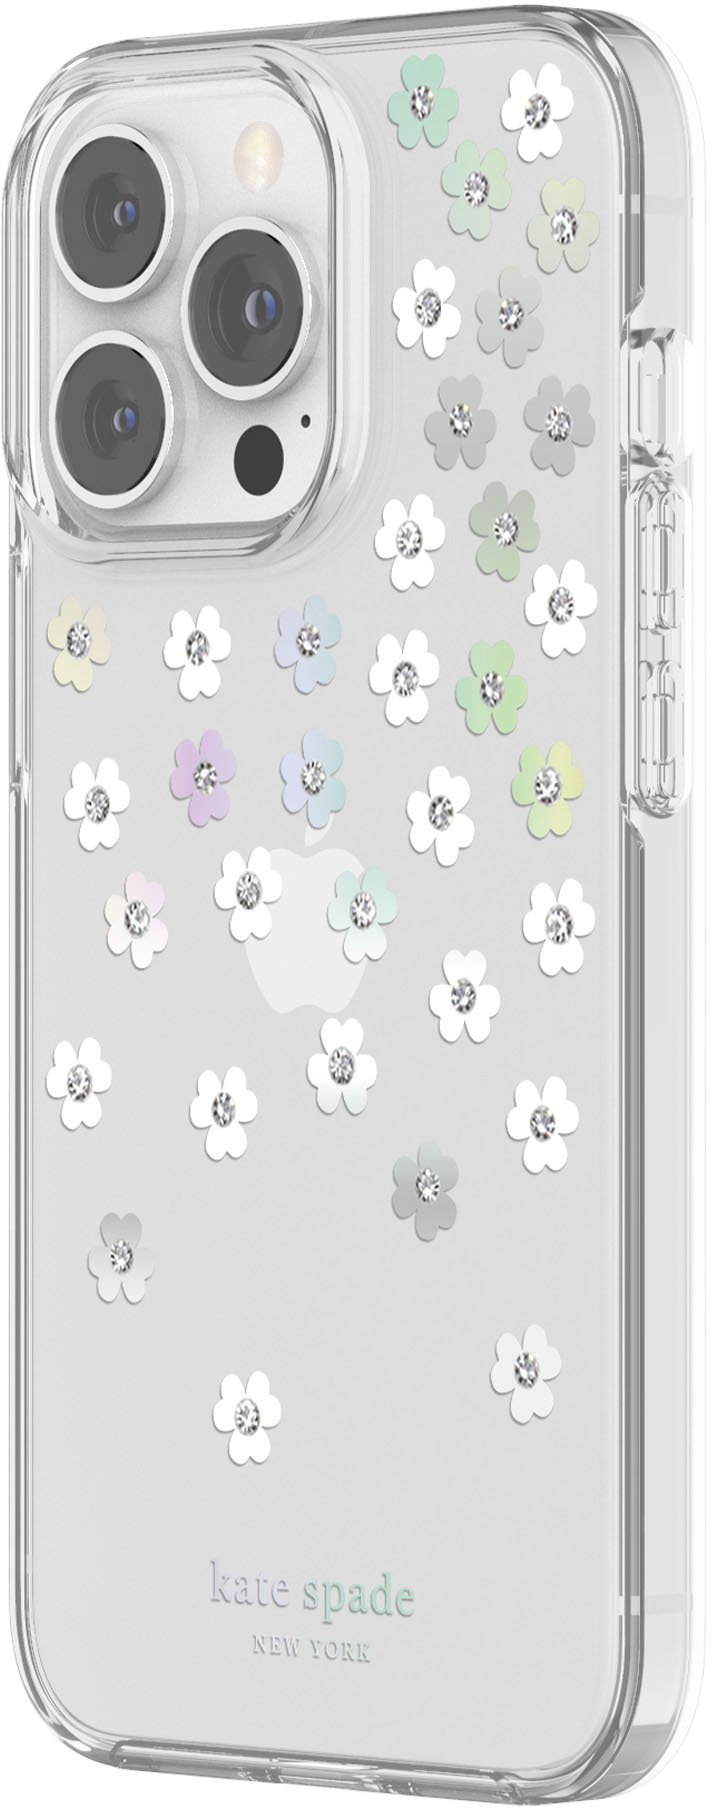 Angle View: kate spade new york - Protective Hardshell Case for iPhone 13 Pro - Flower